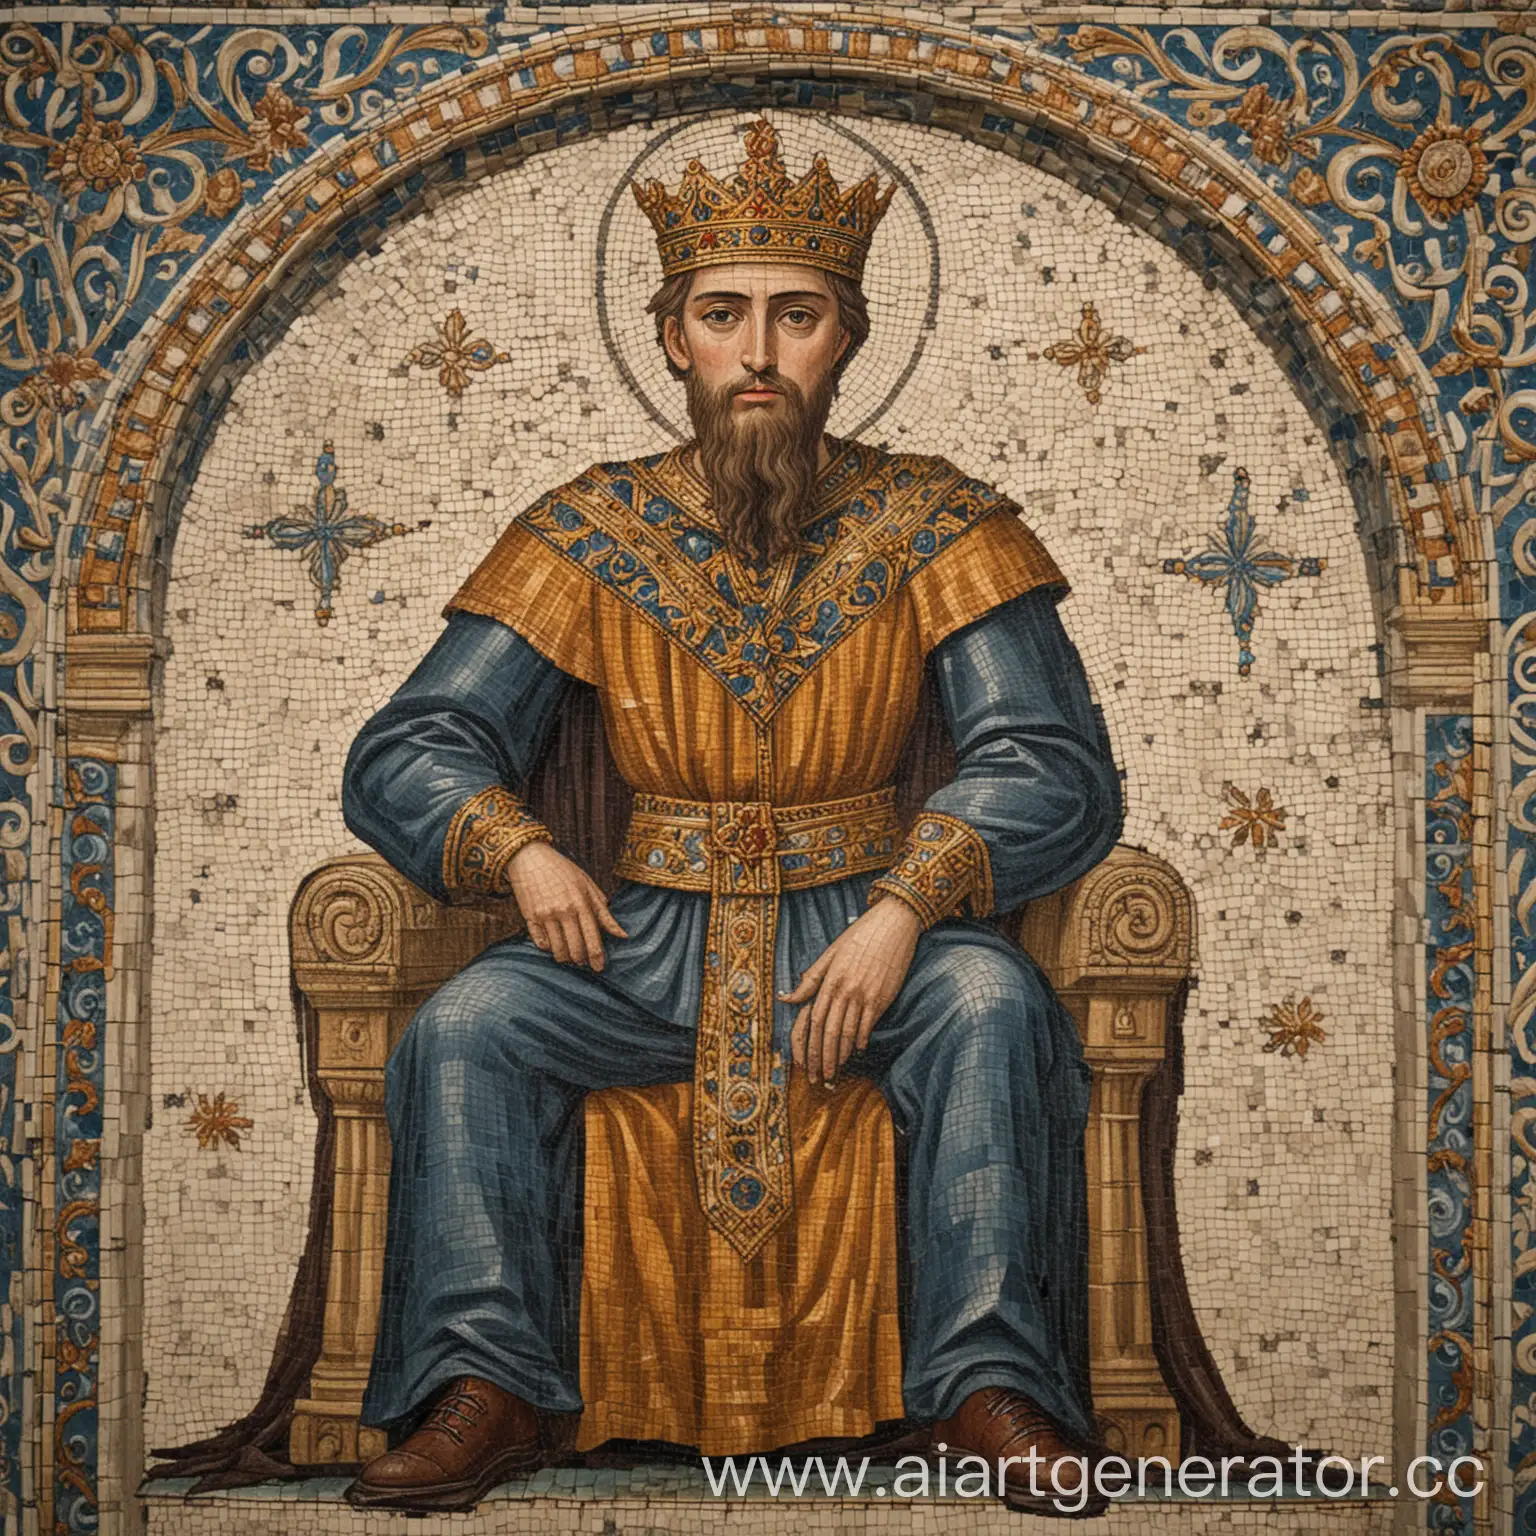 Medieval-Orthodox-Mosaic-Young-Crimean-Gothic-King-Enthroned